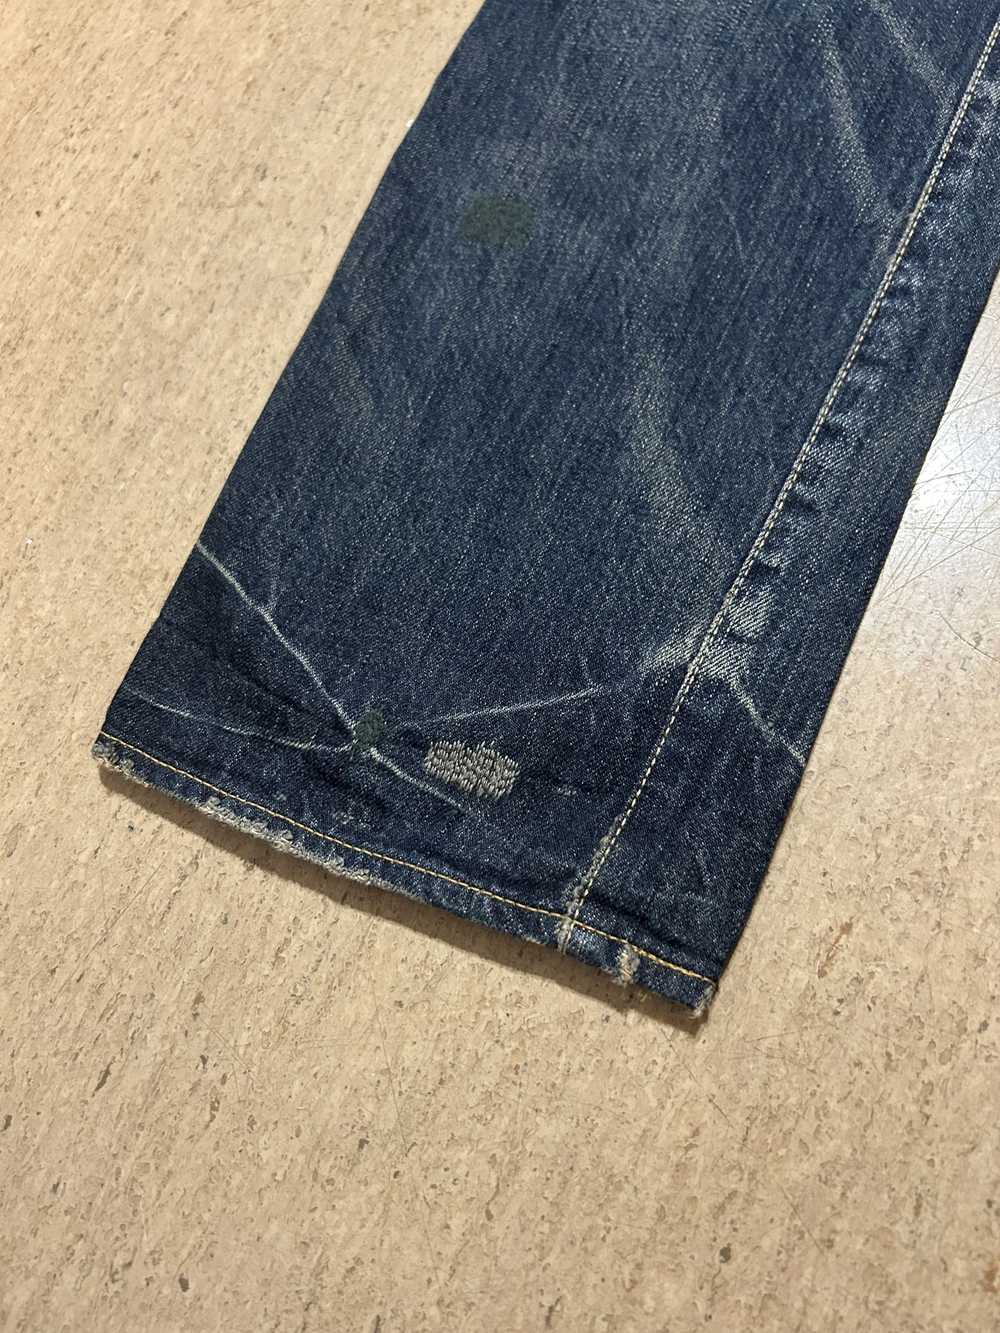 Undercover *SOLD* Undercover aw07 Apple Fang Denim - image 8